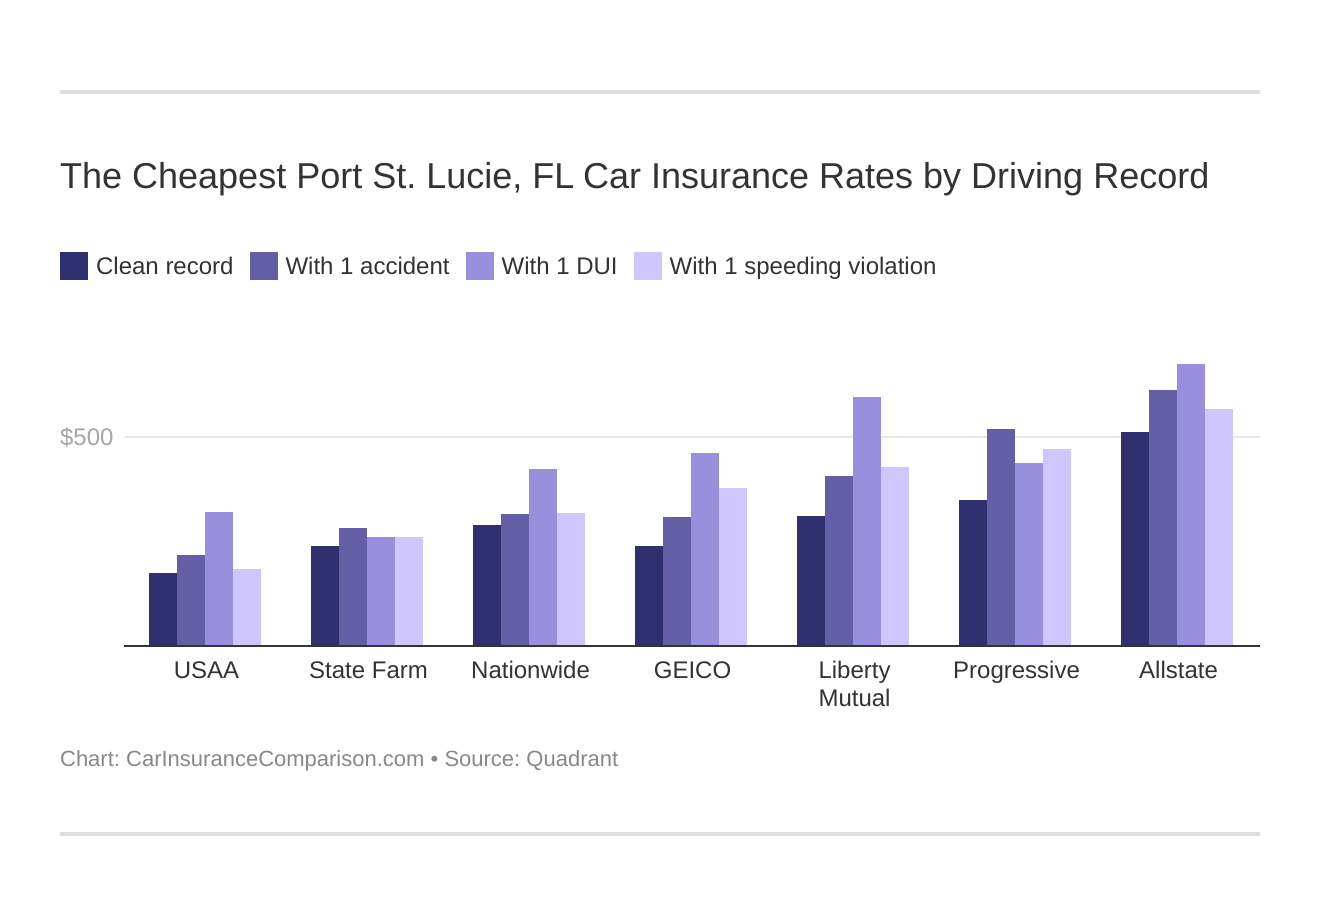 The Cheapest Port St. Lucie, FL Car Insurance Rates by Driving Record